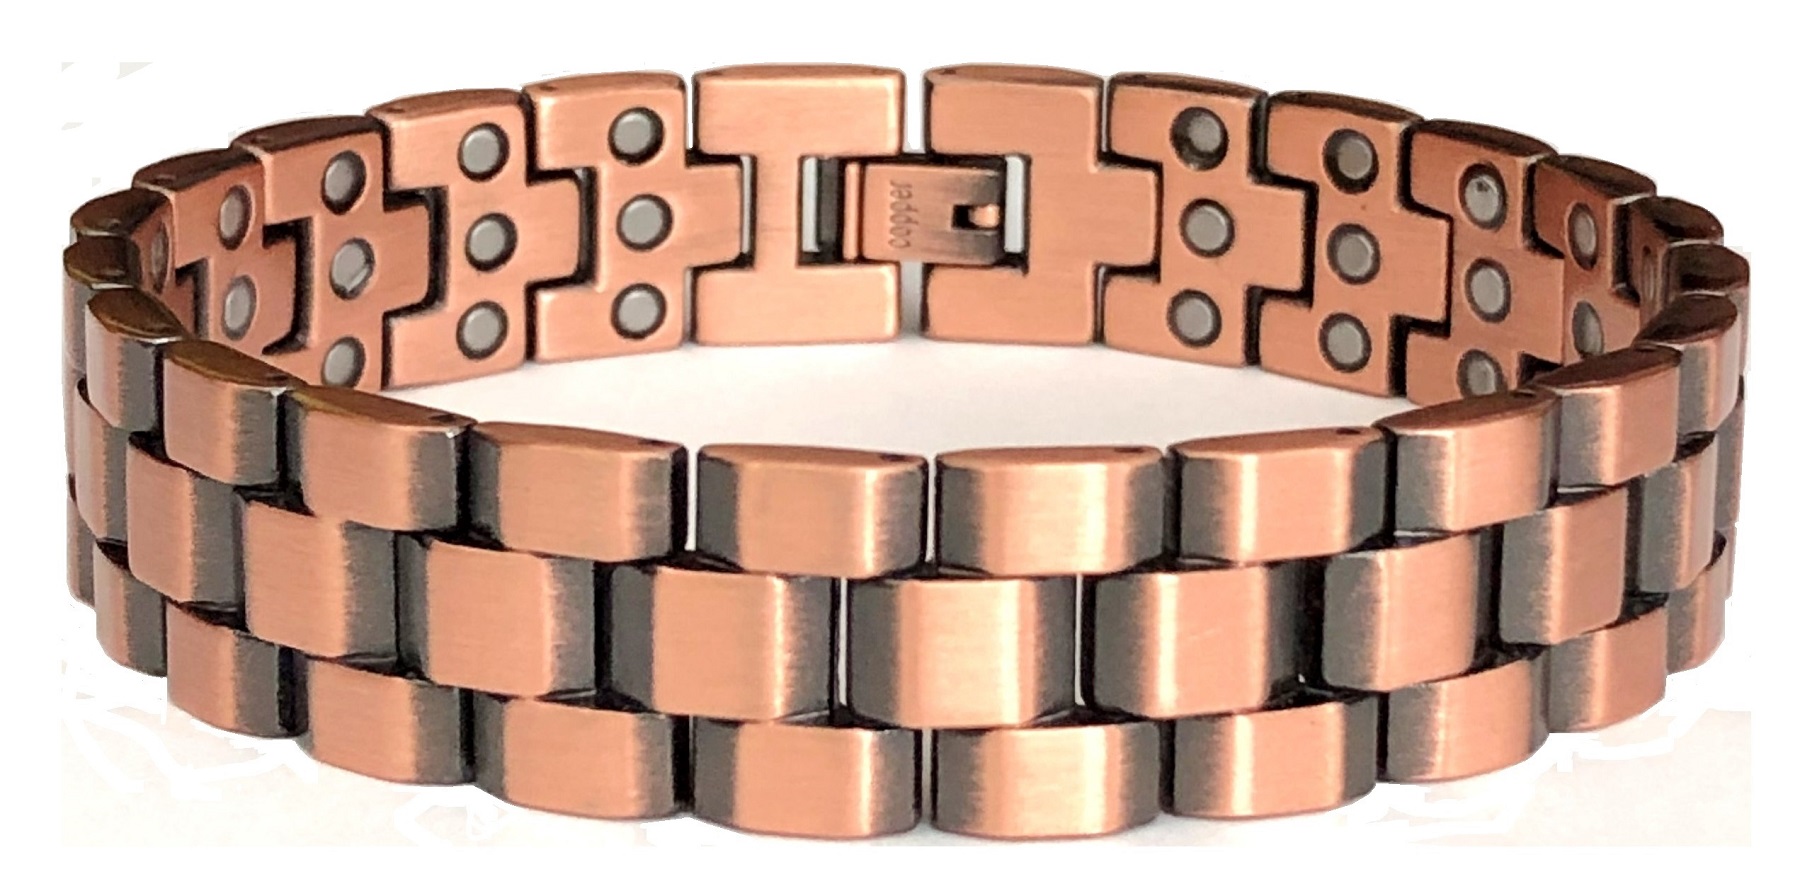 99.9% Pure Copper Brick Links Magnetic Bracelet with Triple Magnets #RCB-001A